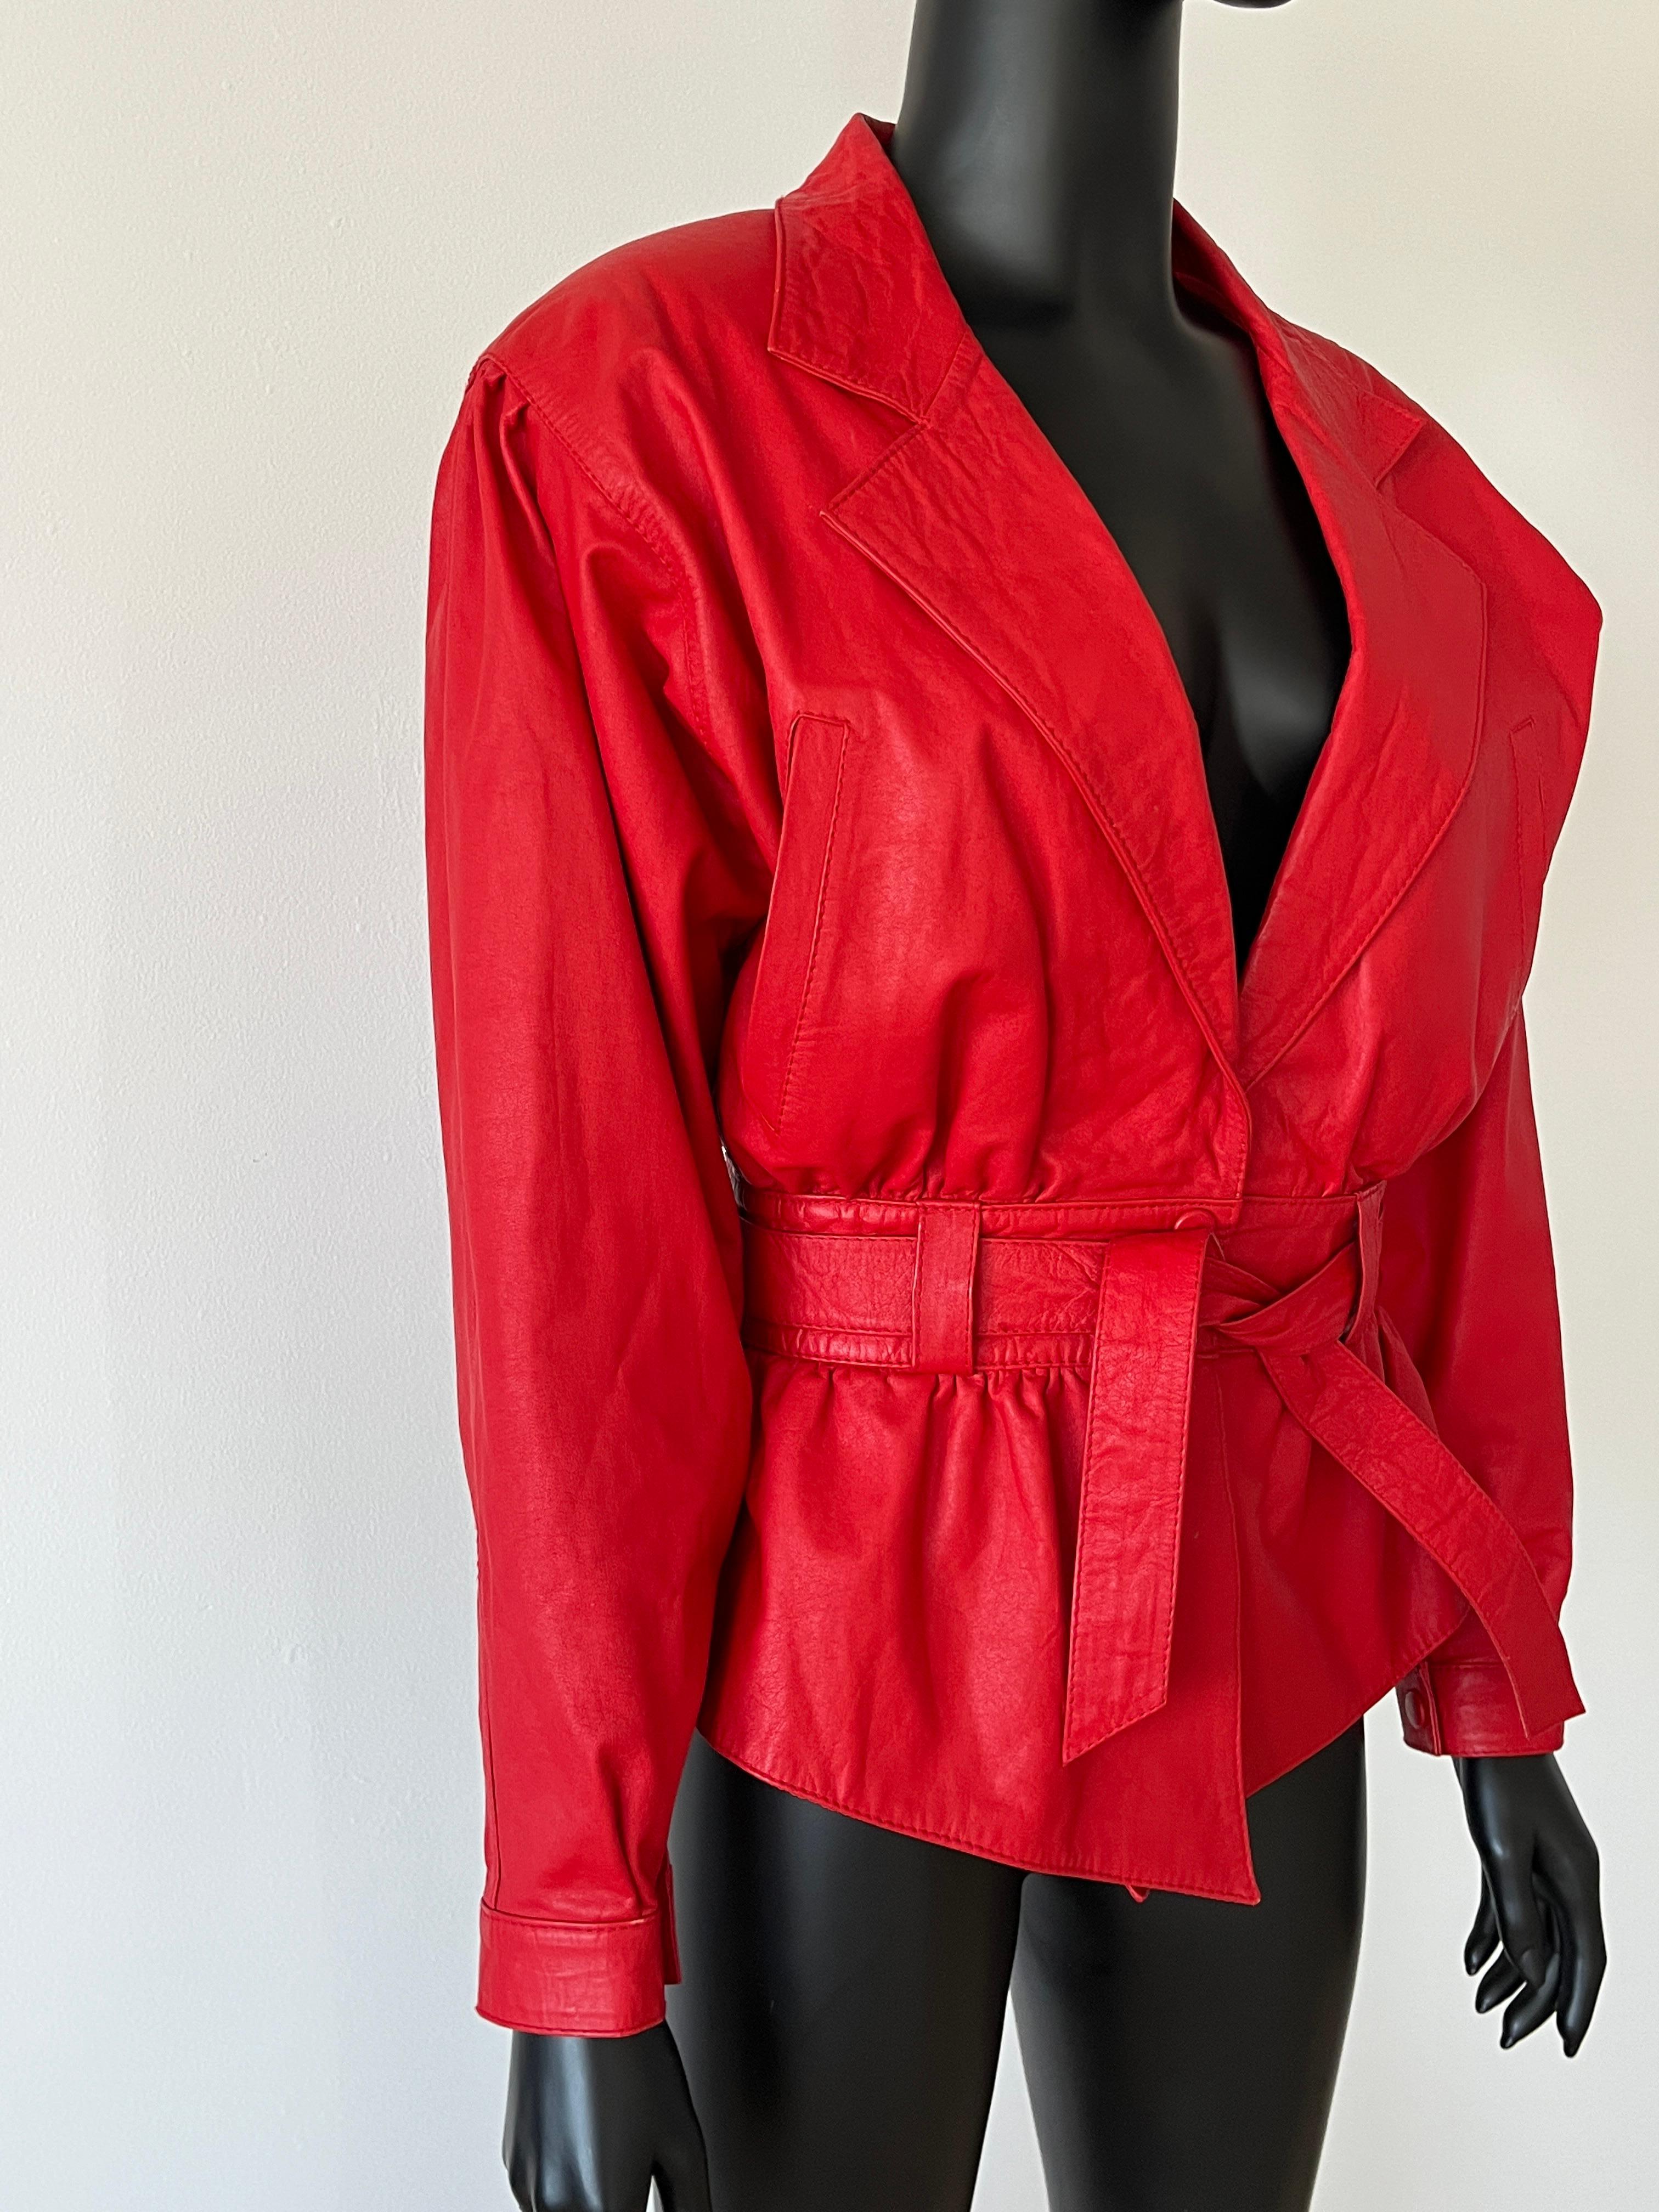 1980s Red Leather Jacket In Good Condition For Sale In COLLINGWOOD, AU